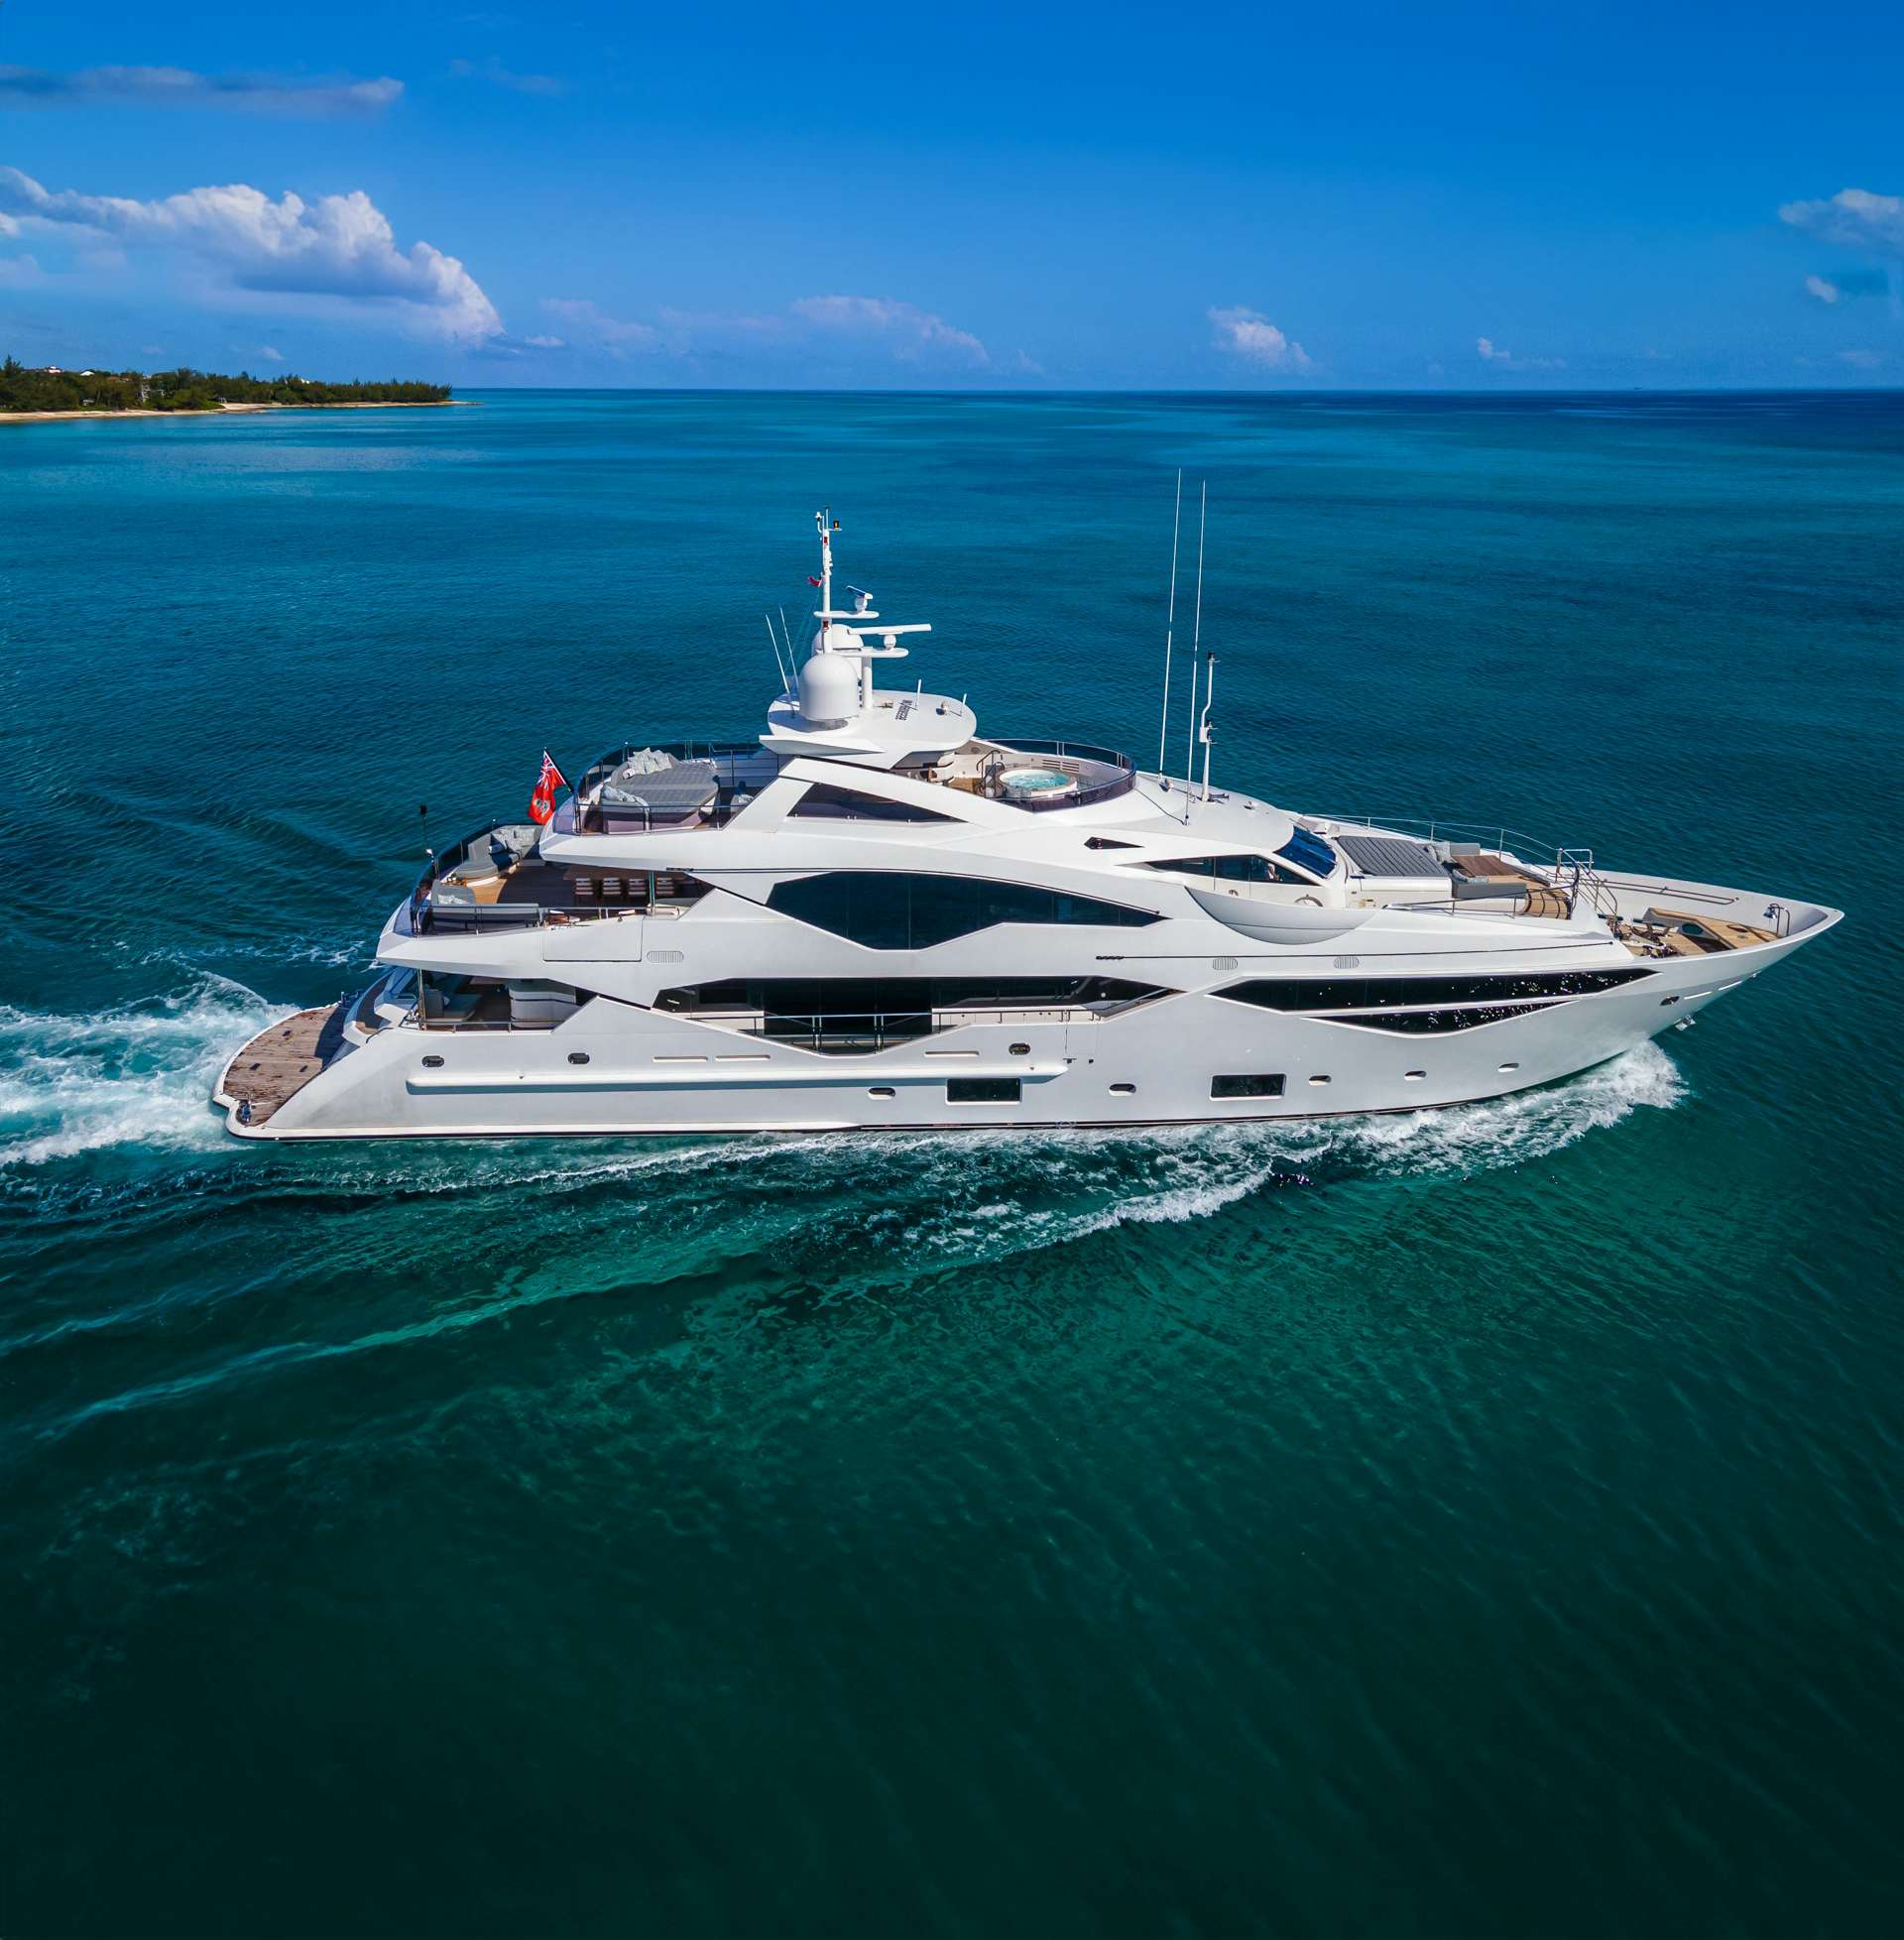 Aerial view of the Sunseeker 40 yacht sailing through turquoise waters, with a clear sky above and a hint of coastline in the distance.